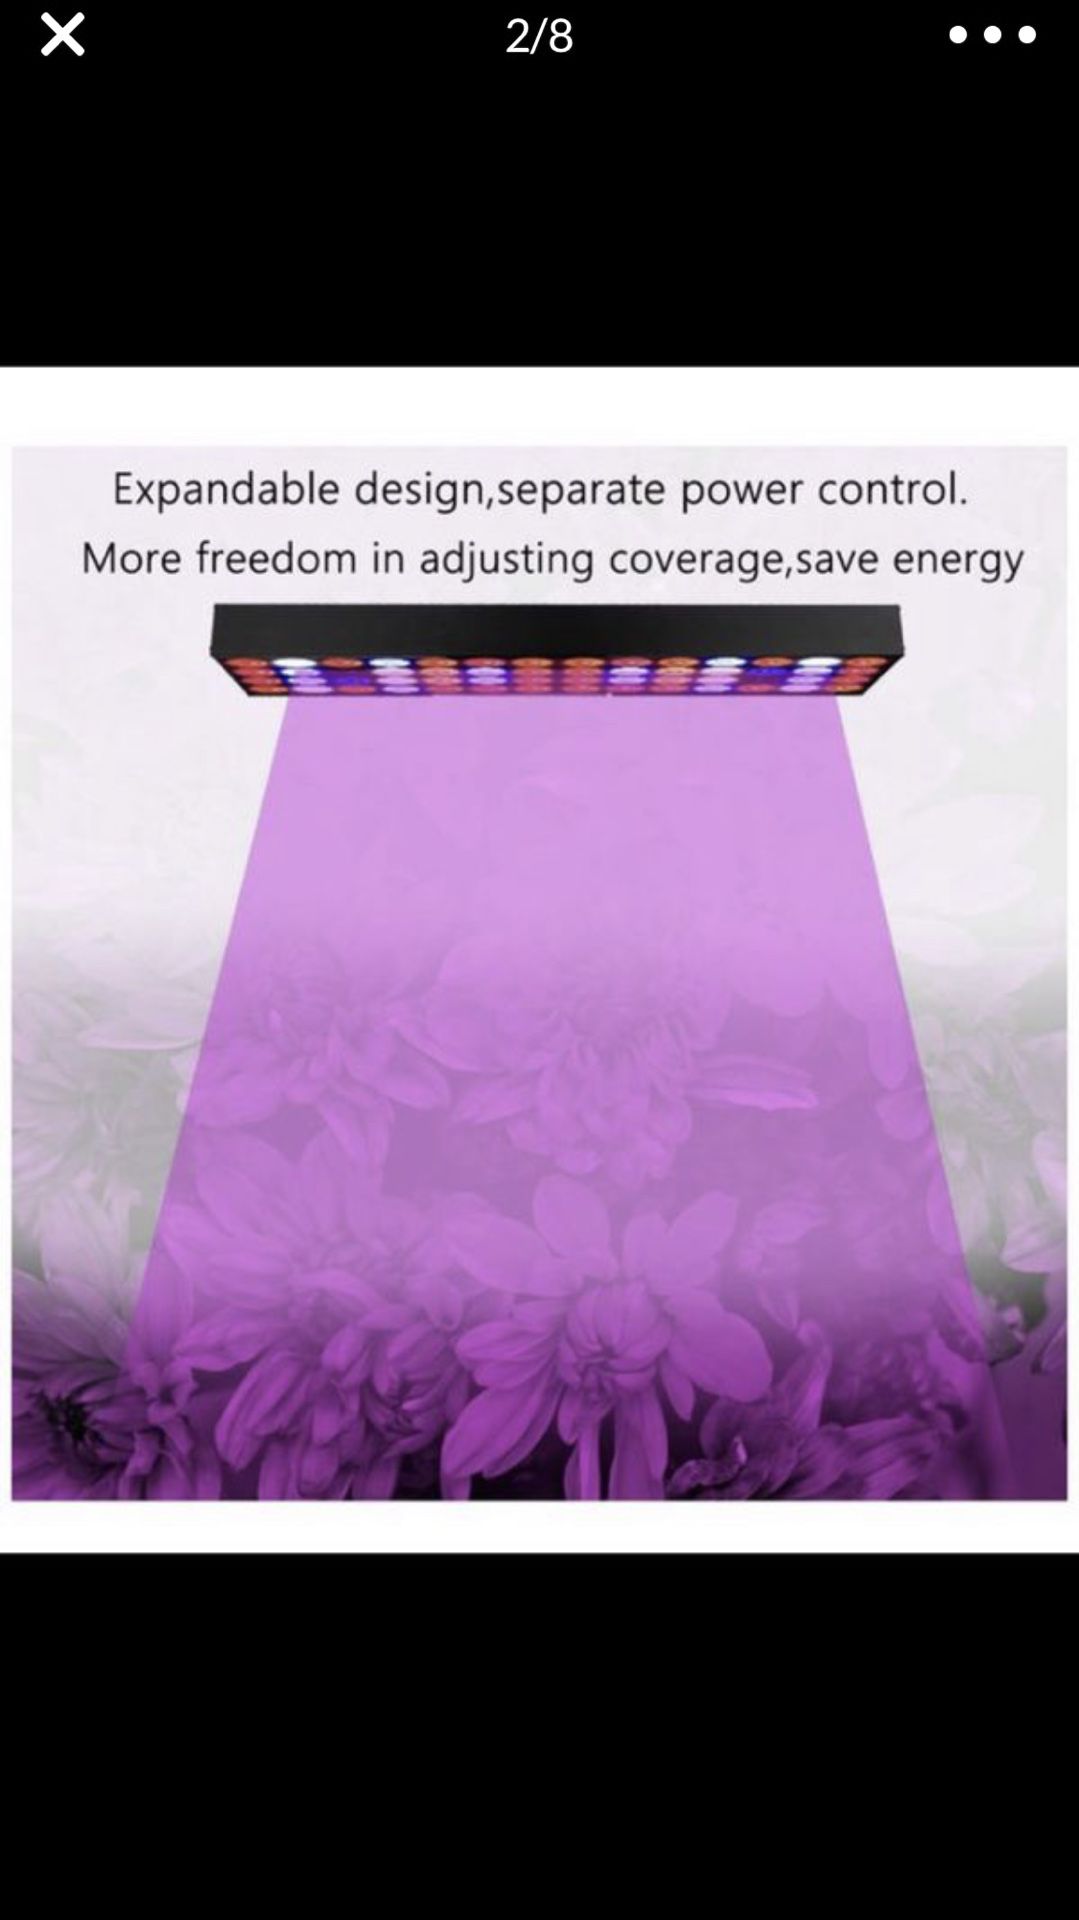 30W Led Grow Light ZXMEAN Full Spectrum Grow Reflector Growing Light Panel with Adjustable Hanger for Indoor Plants Hydroponic Greenhouse Veg and Flo